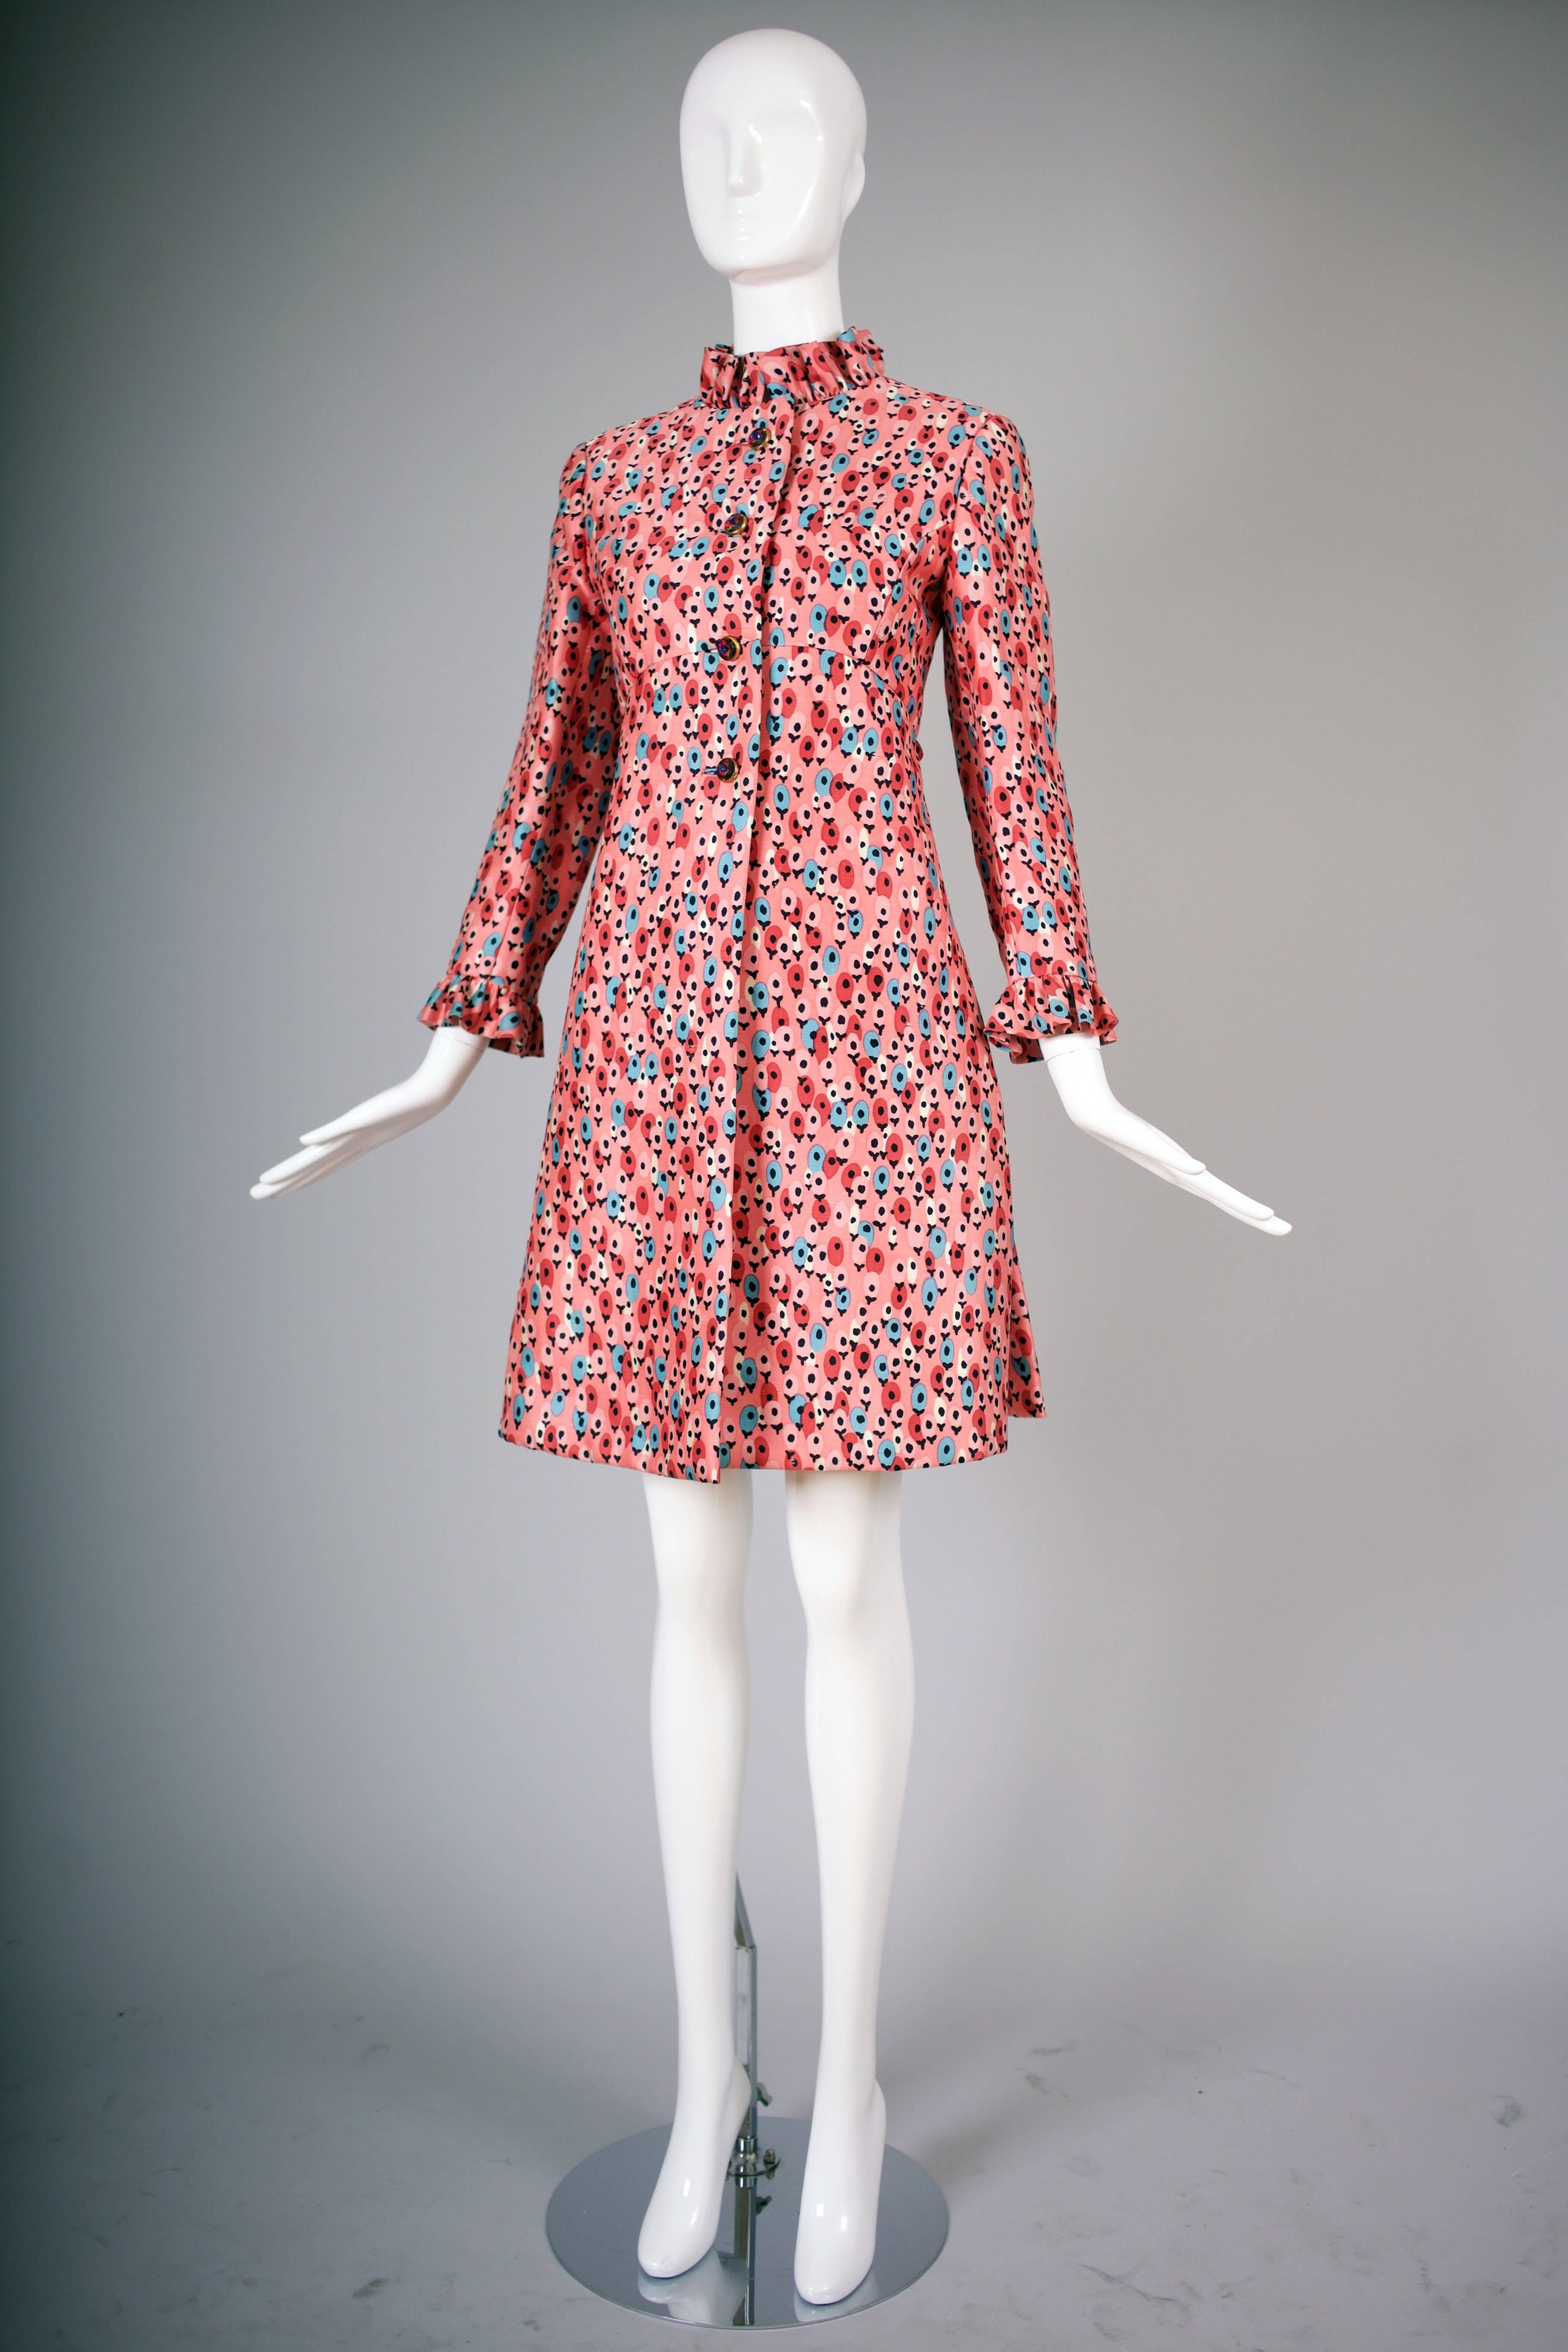 1960's Bill Blass for Maurice Rentner silk coat dress with ruffled neck and cuffs, deep pleats at either side and purple crystal buttons down the front. Vintage tag size 8 but it is smaller - more suited to a 4 or small 6. Please consult